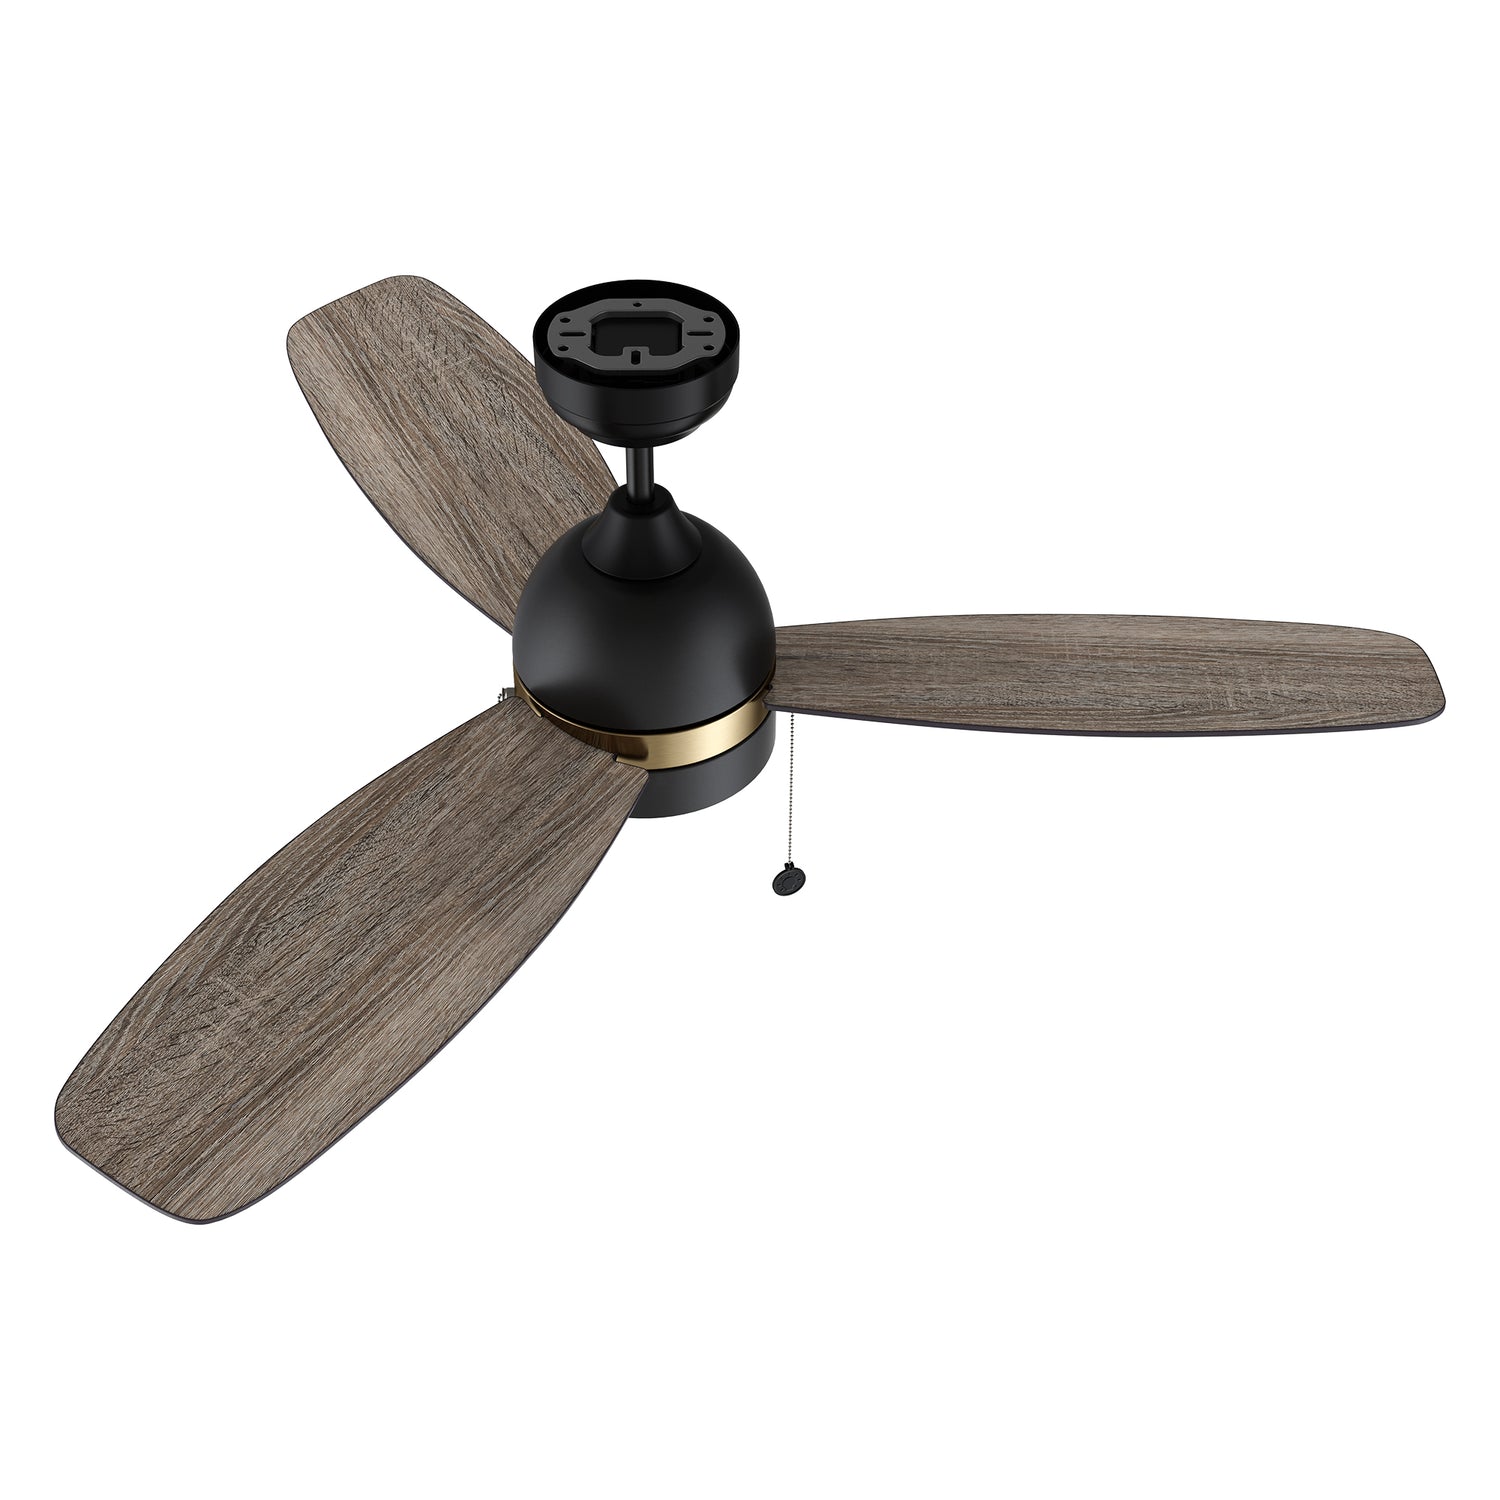 Striking and natural light wood finish on the fan blades. Enhances the Carro Tesoro pull chain ceiling fan&